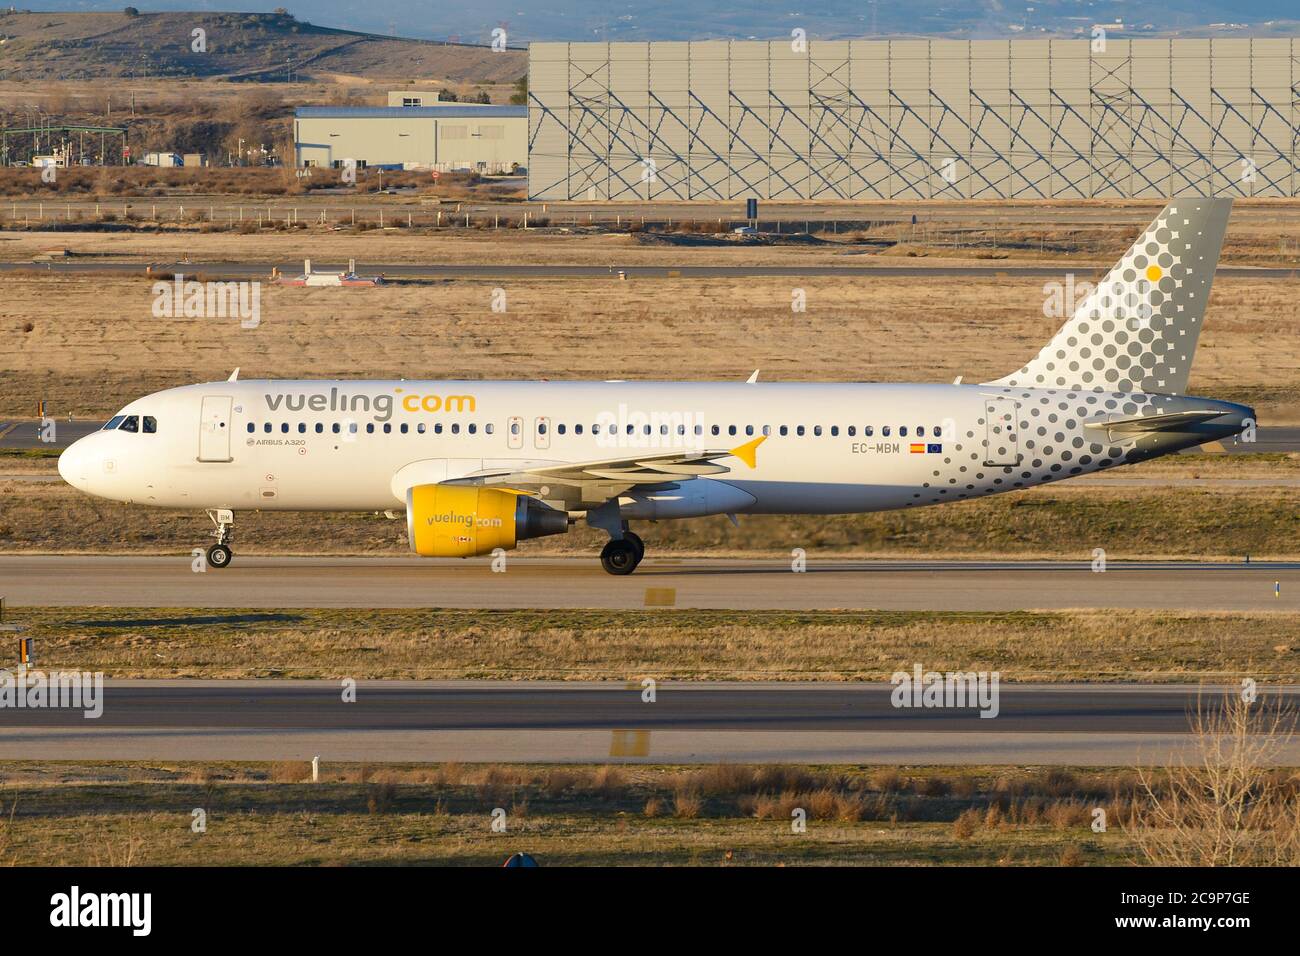 Vueling Airlines A320 taxiing at Madrid Barajas Airport in Spain. Aircraft A320 EC-MBM. Spanish low cost airline. Stock Photo